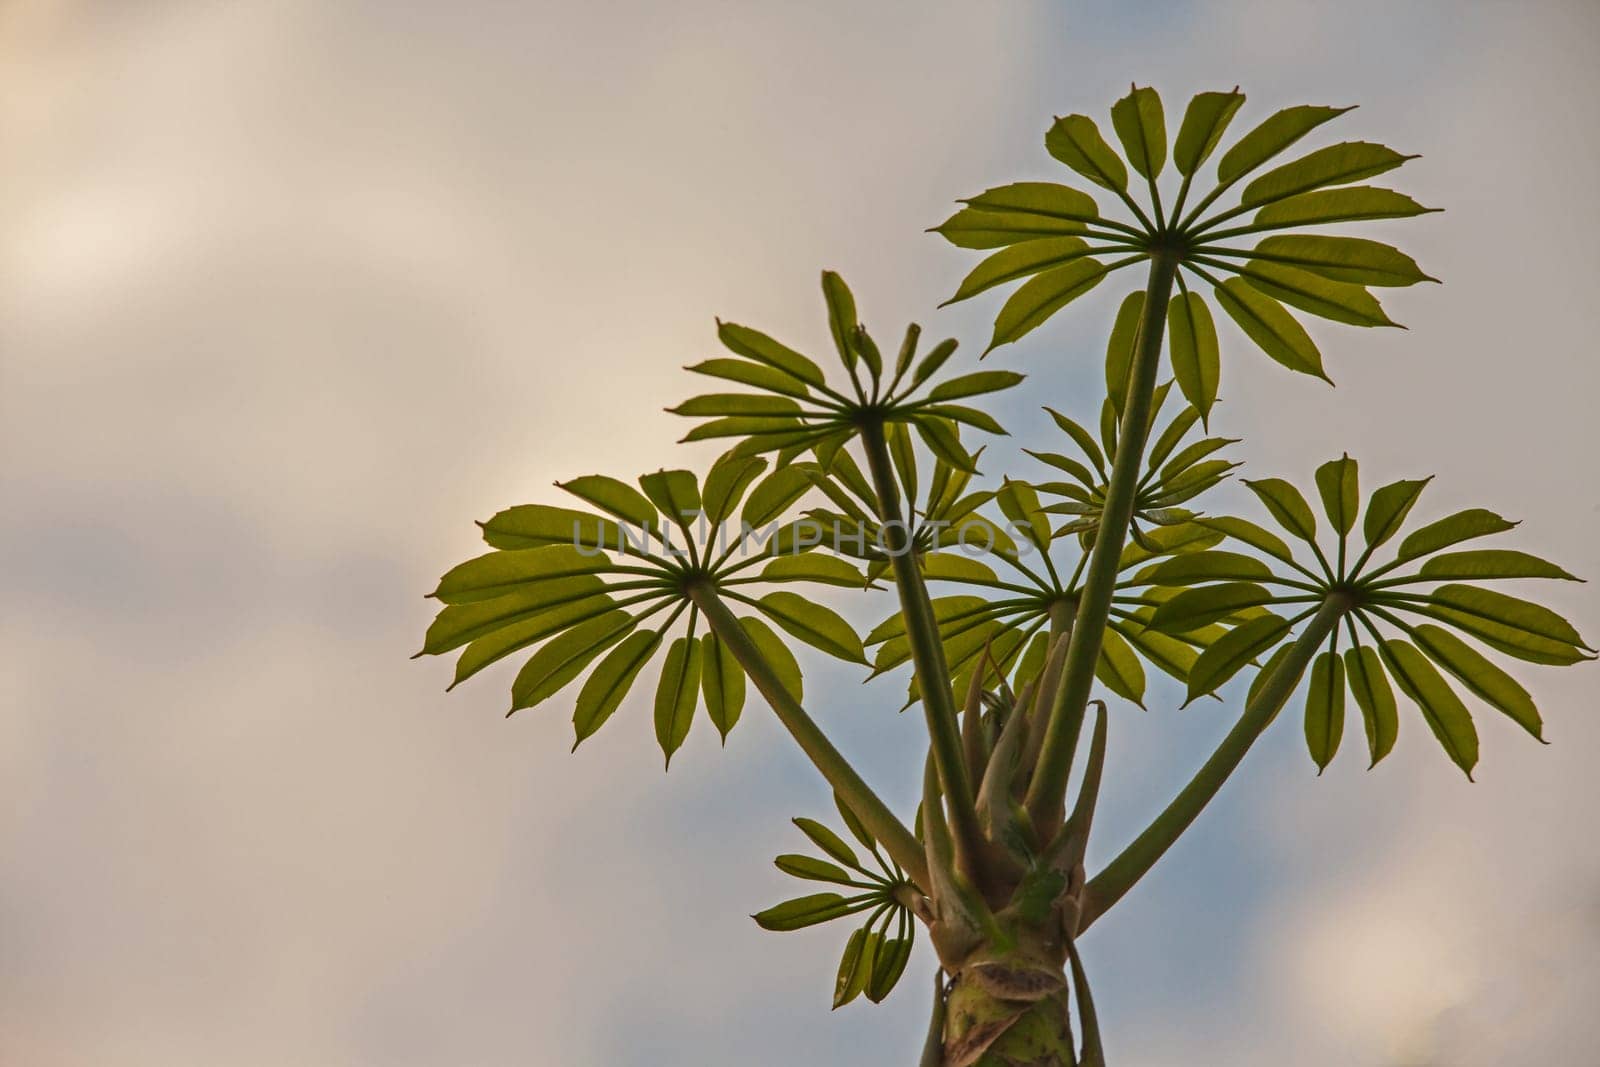 New leaves of the Umbrella Tree (Brassaia actinophylla) against a cloudy sky